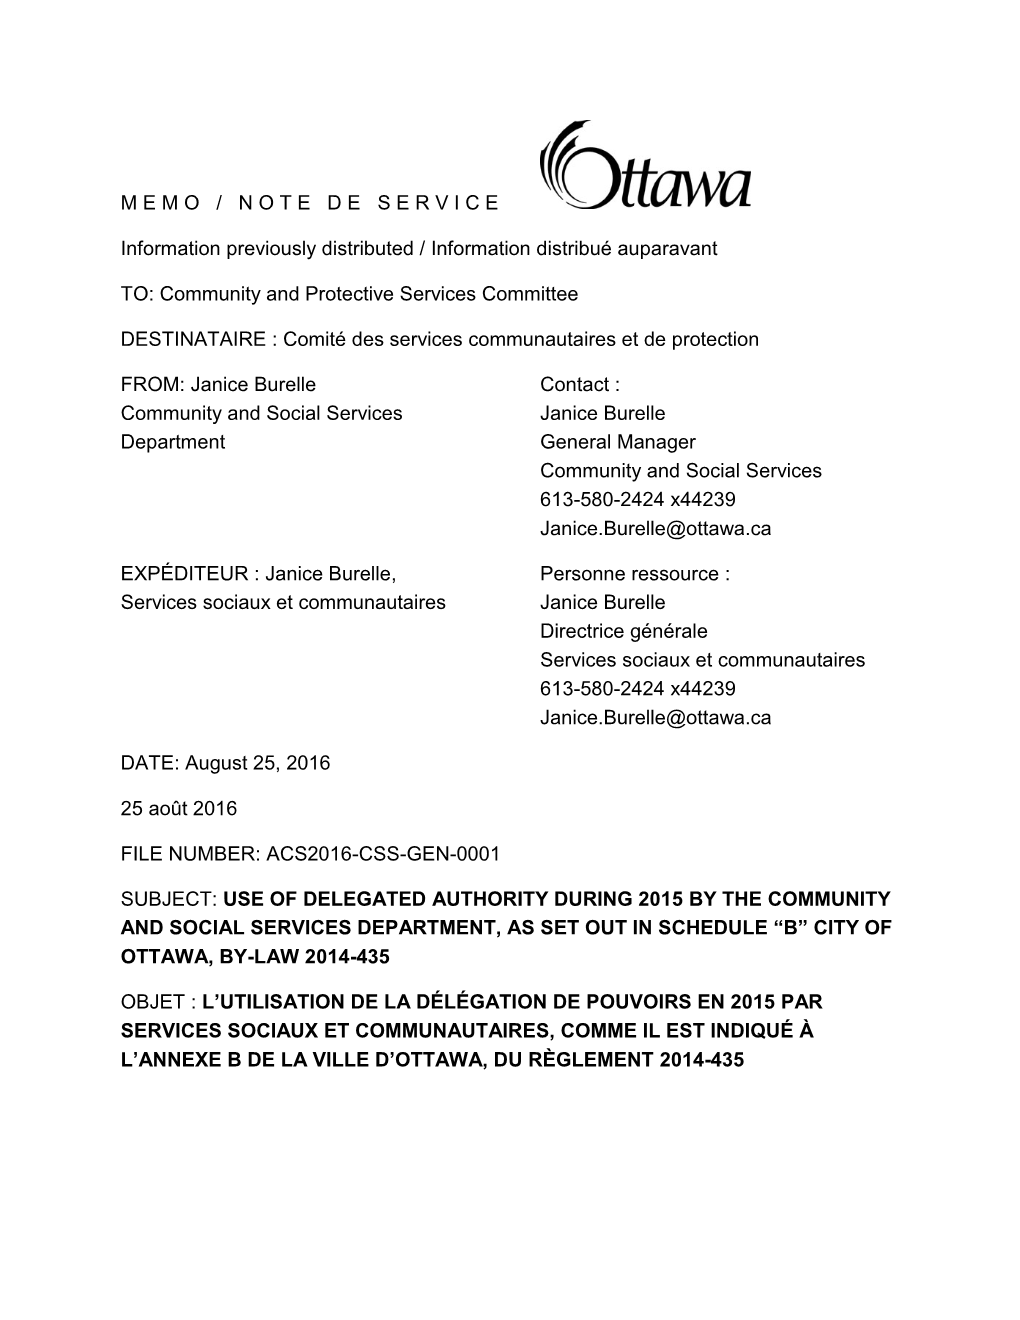 Use of Delegated Authority During 2015 by the Community and Social Services Department, As Set out in Schedule “B” City of Ottawa, By-Law 2014-435